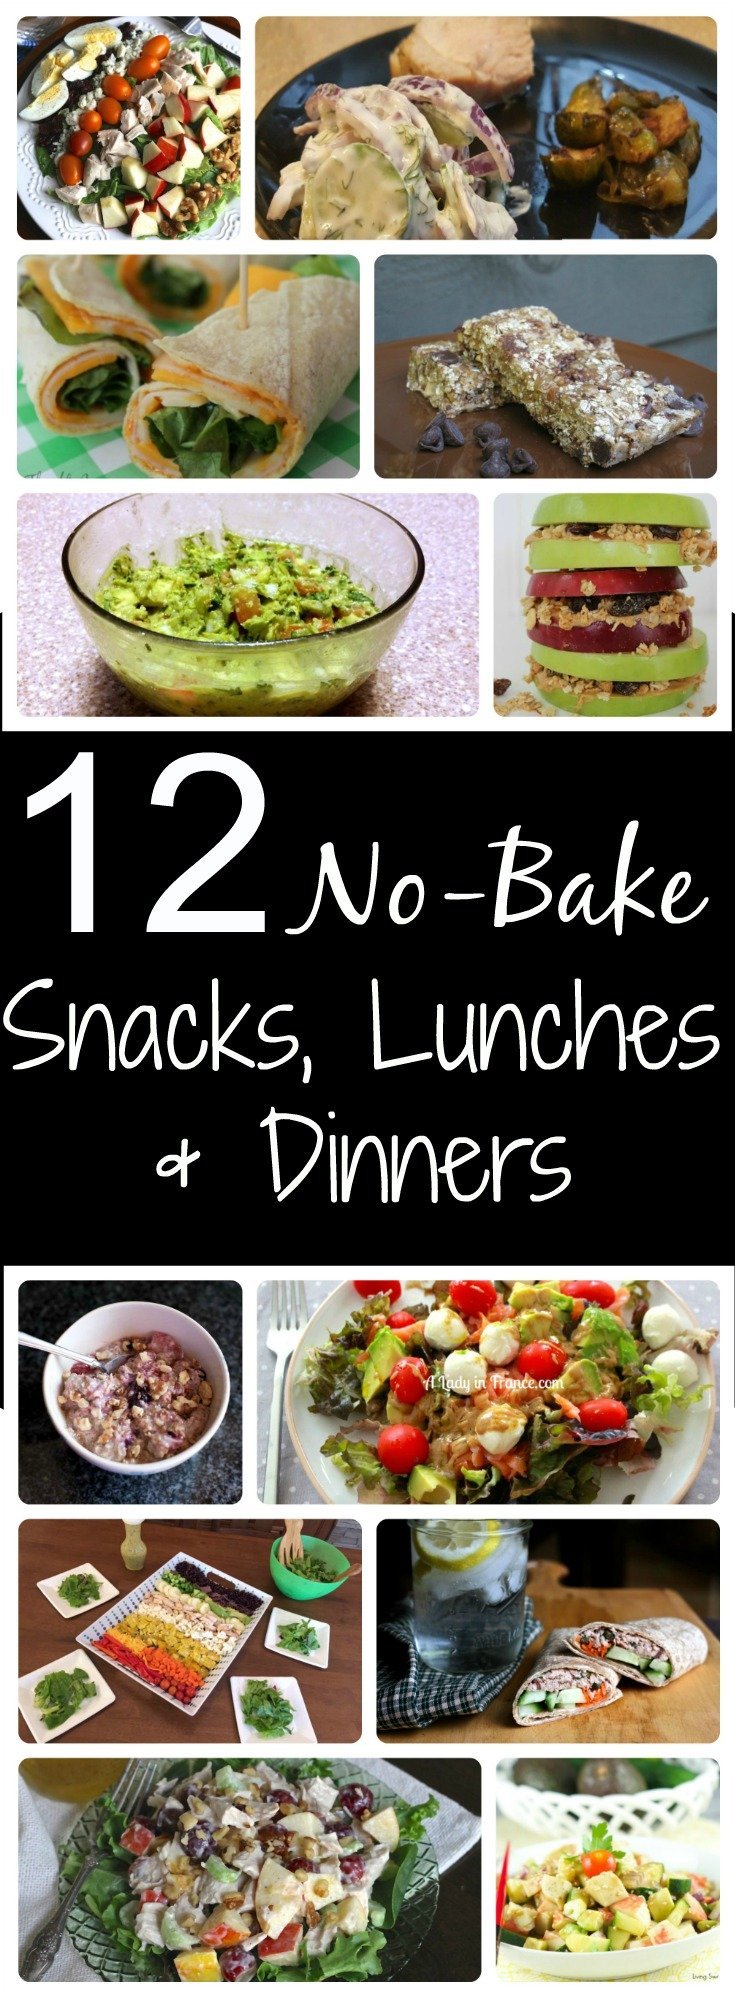 12 No-Bake Snacks, lunches & Dinners